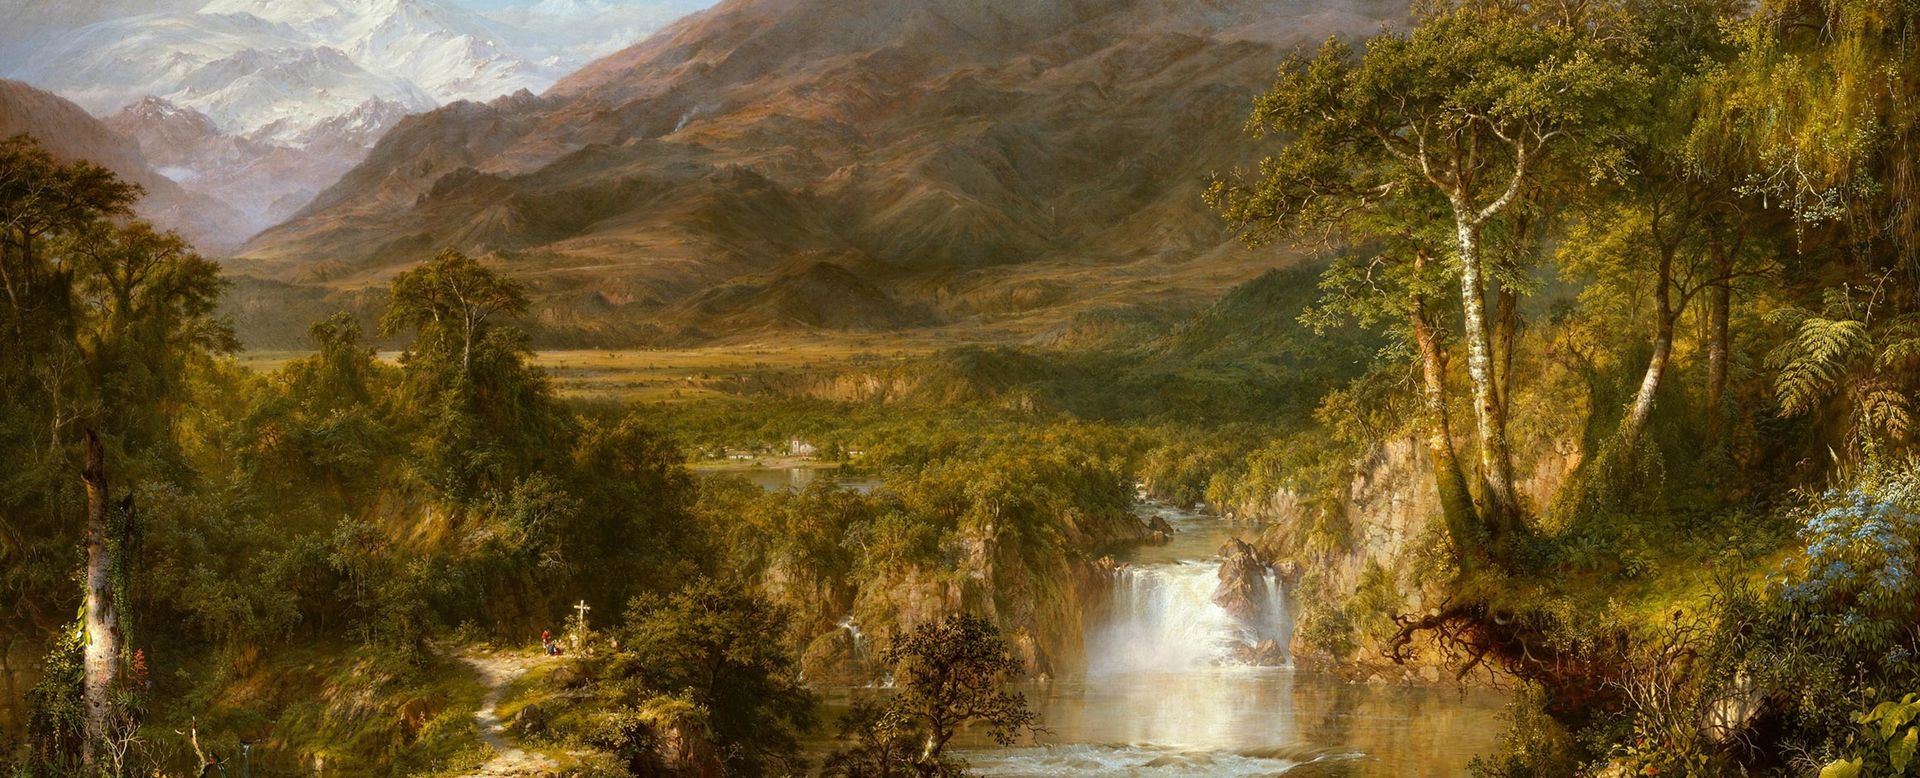 Landscape painting of the Andes, with a small cross placed on the edge of cliff, to the left of a waterfall, with mountains covered by clouds followed by a snow-capped mountain in the background 